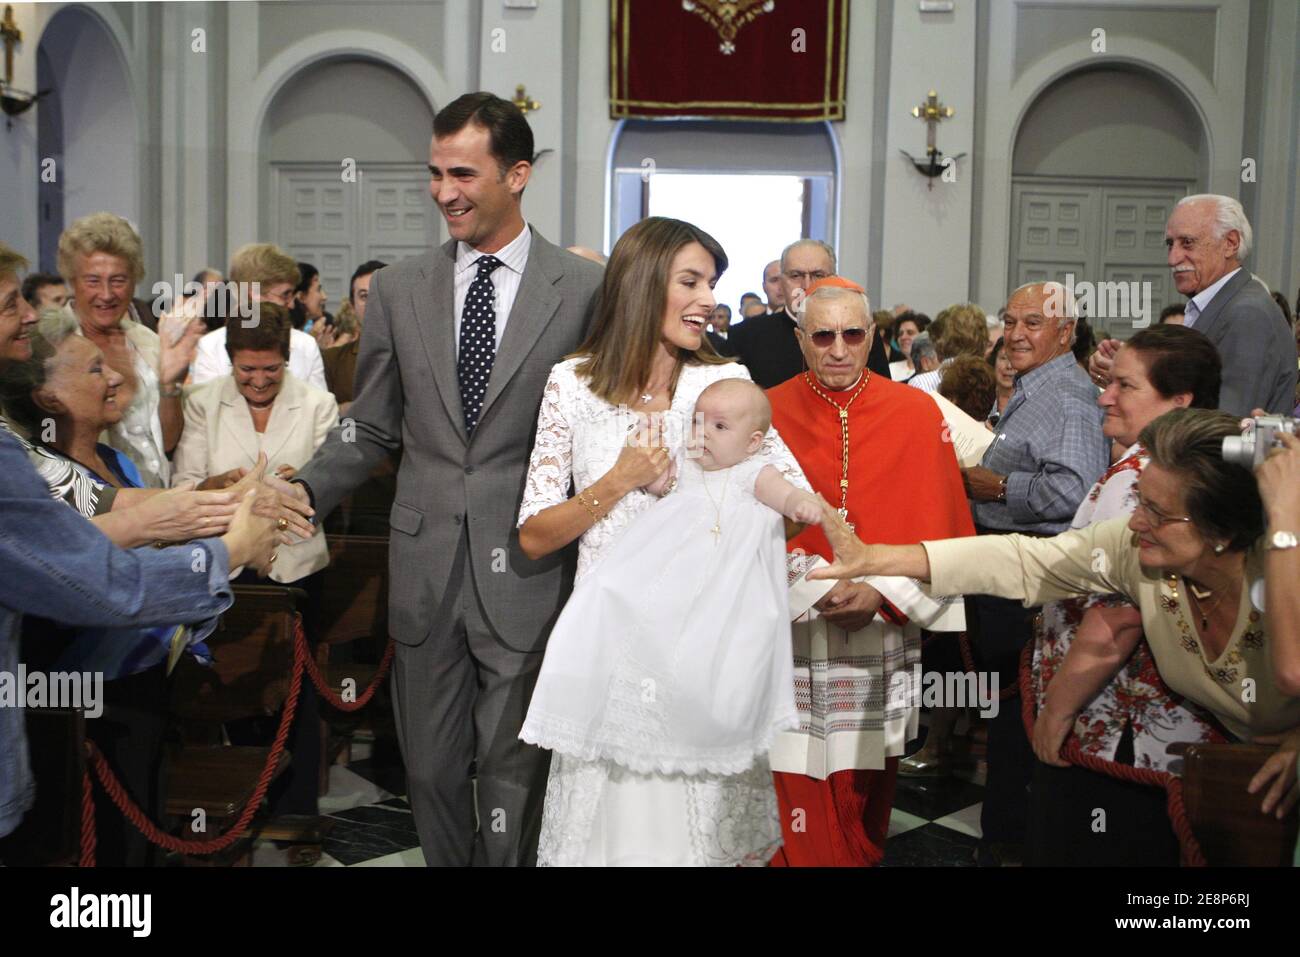 Spanish Crown Prince Felipe de Borbon (C-L) and his wife Princess Letizia (C-R) present her second daughter Princess Sofia (in her mother arms) to the Virgin of Atocha during a ceremony celebrated at Atocha Basilica in Madrid, central Spain on September 19, 2007. Asking the Virgin of Atocha protection for Princess Sofia they are faithful to an ancient tradition of the Spanish Royal Family. Photo by Angel Diaz/Pool/ABACAPRESS.COM Stock Photo